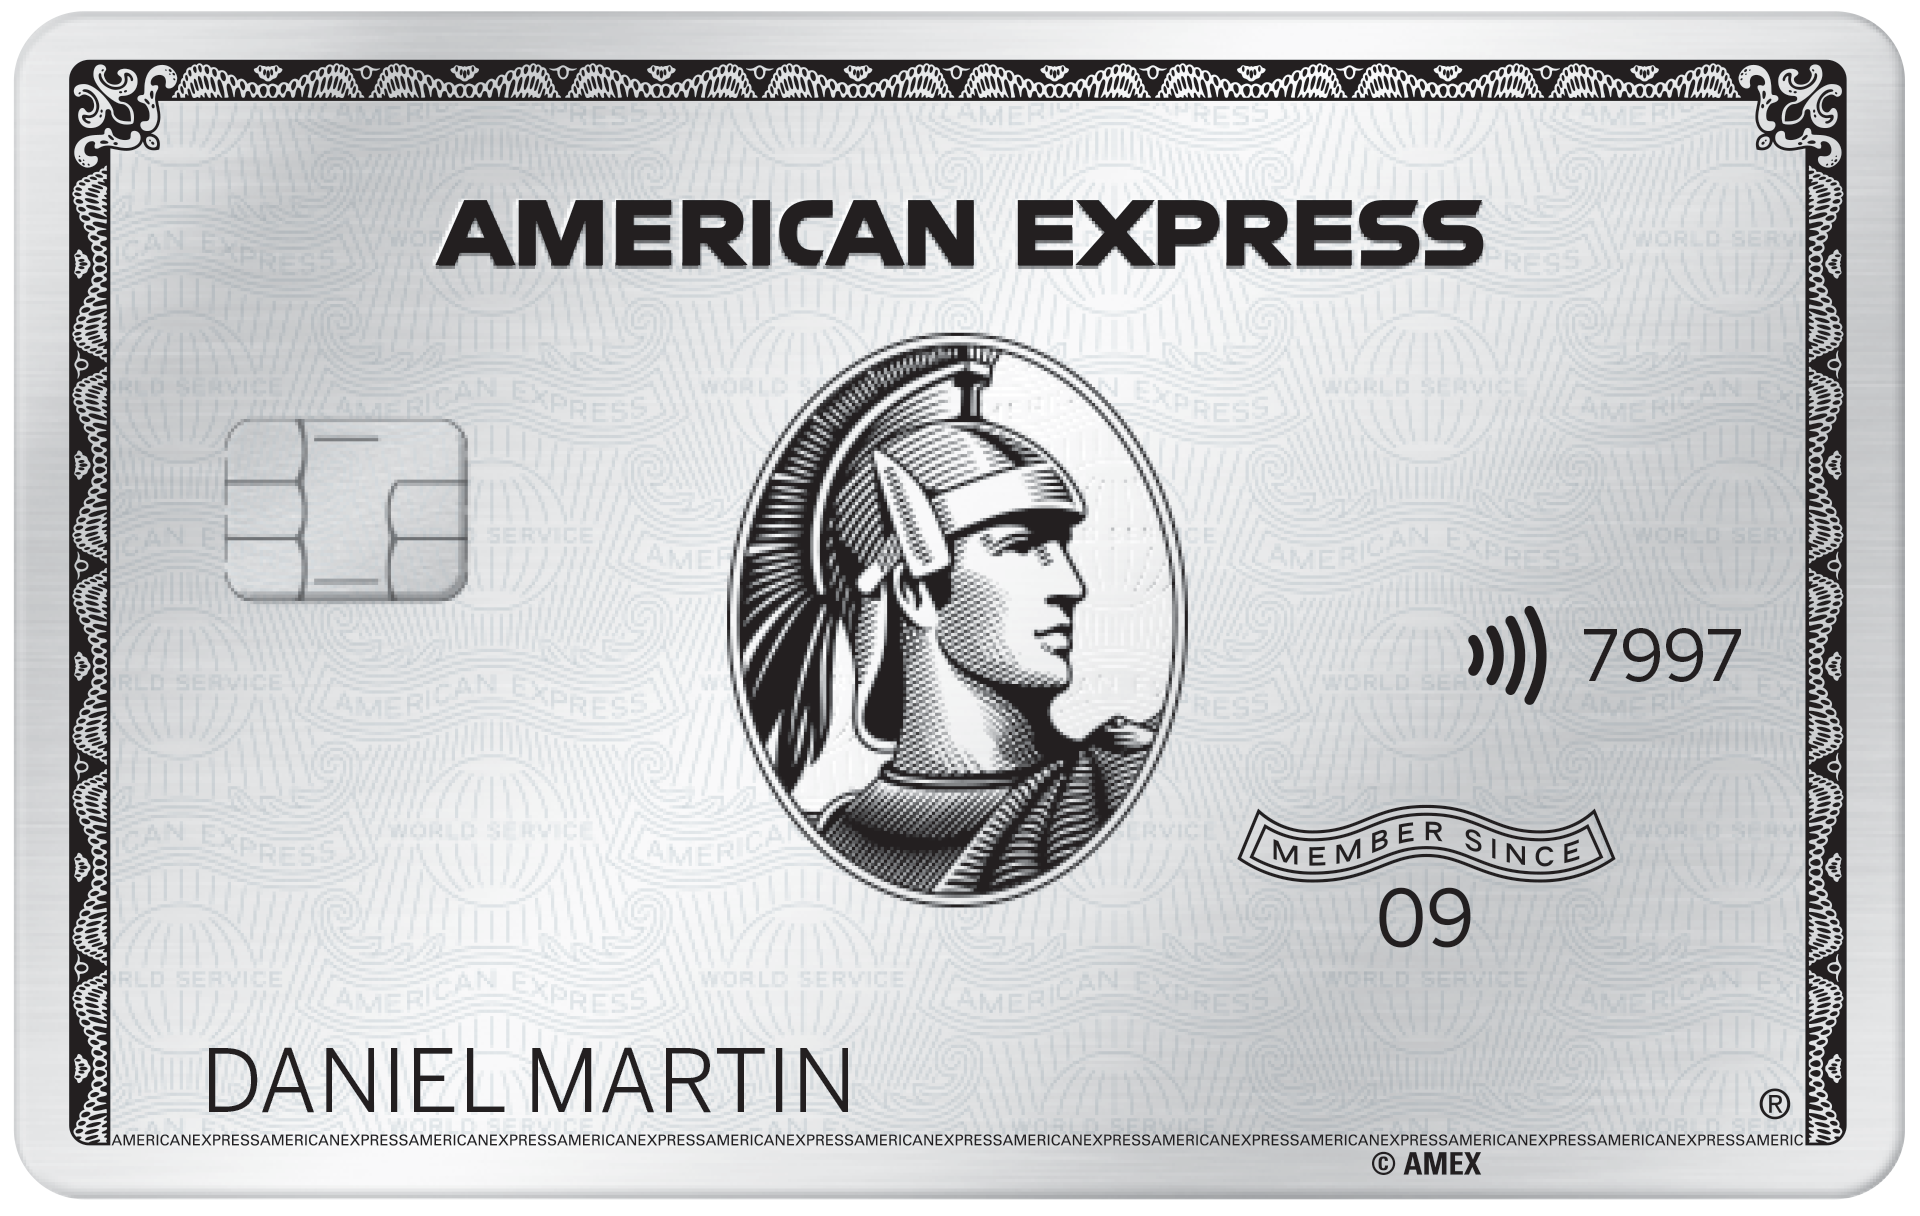 The Platinum Card<sup>®</sup> American Express